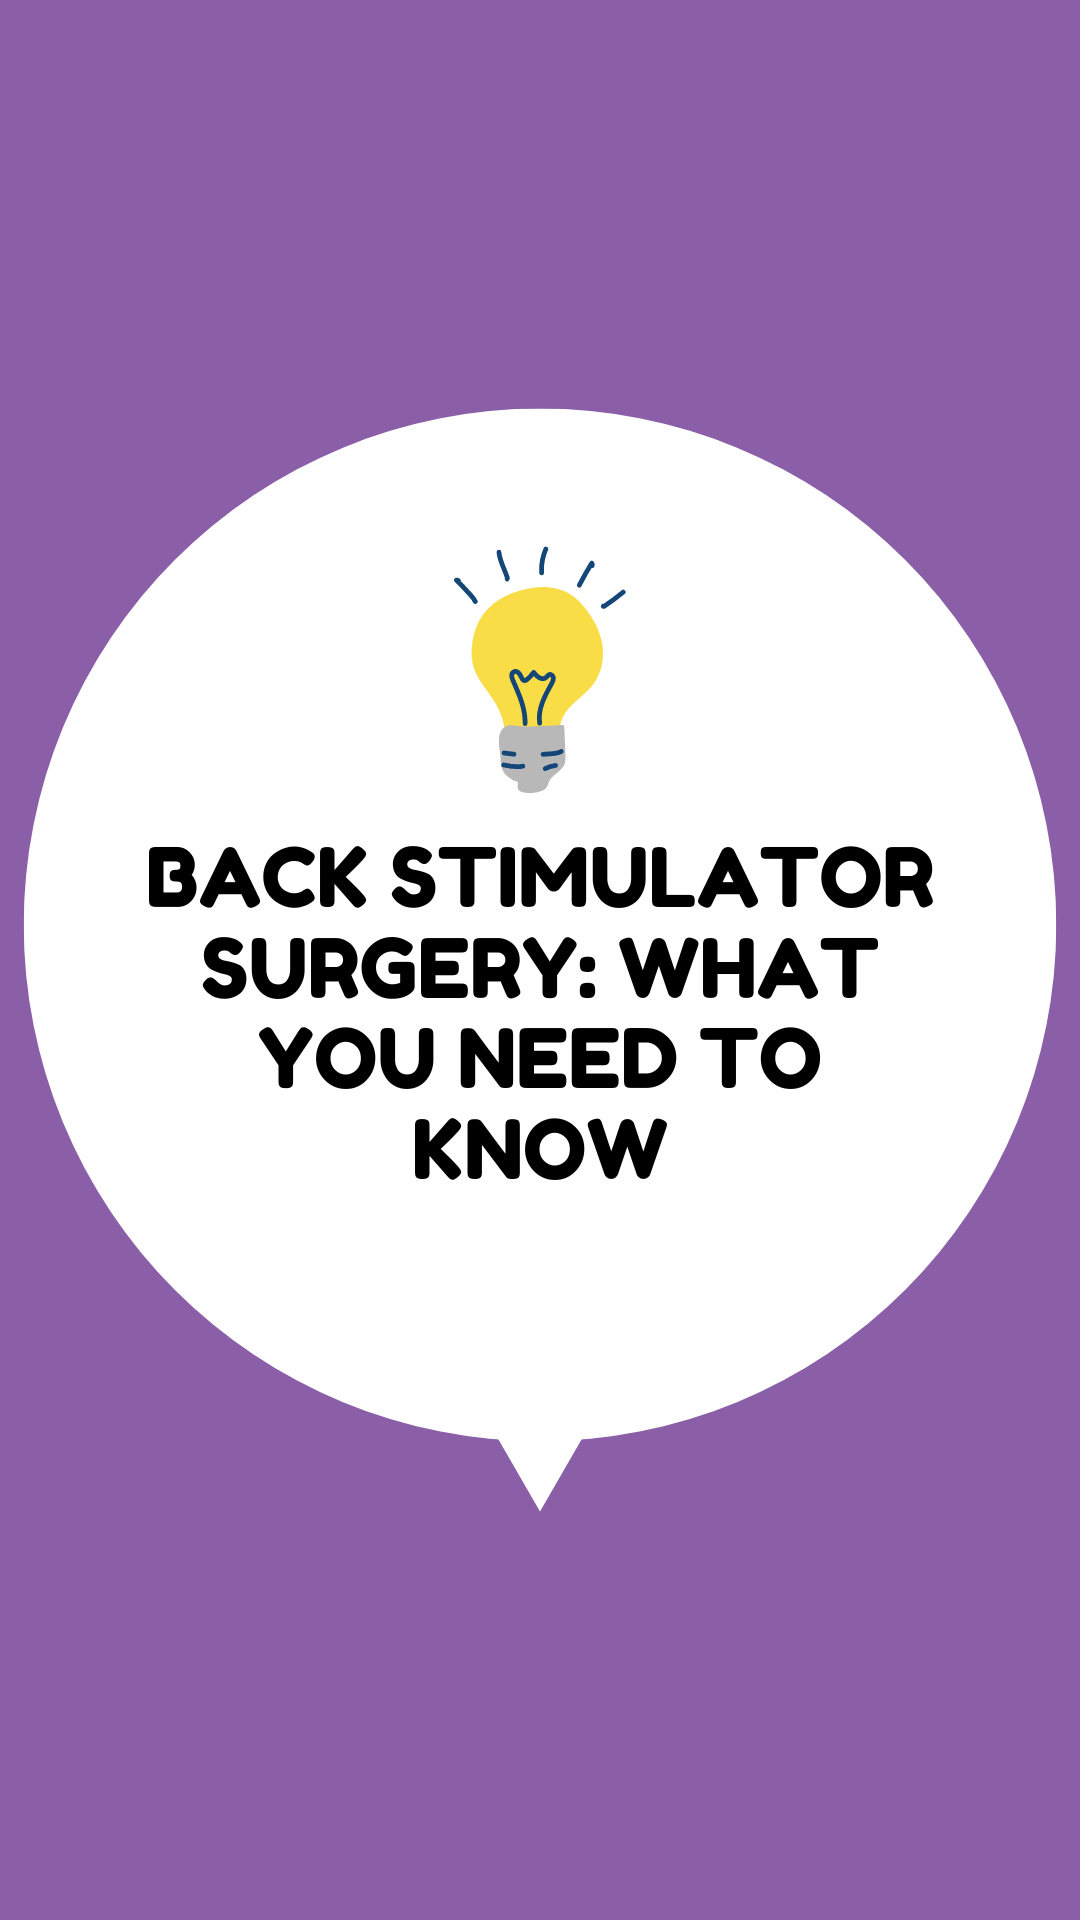 Back Stimulator Surgery: What You Need to Know